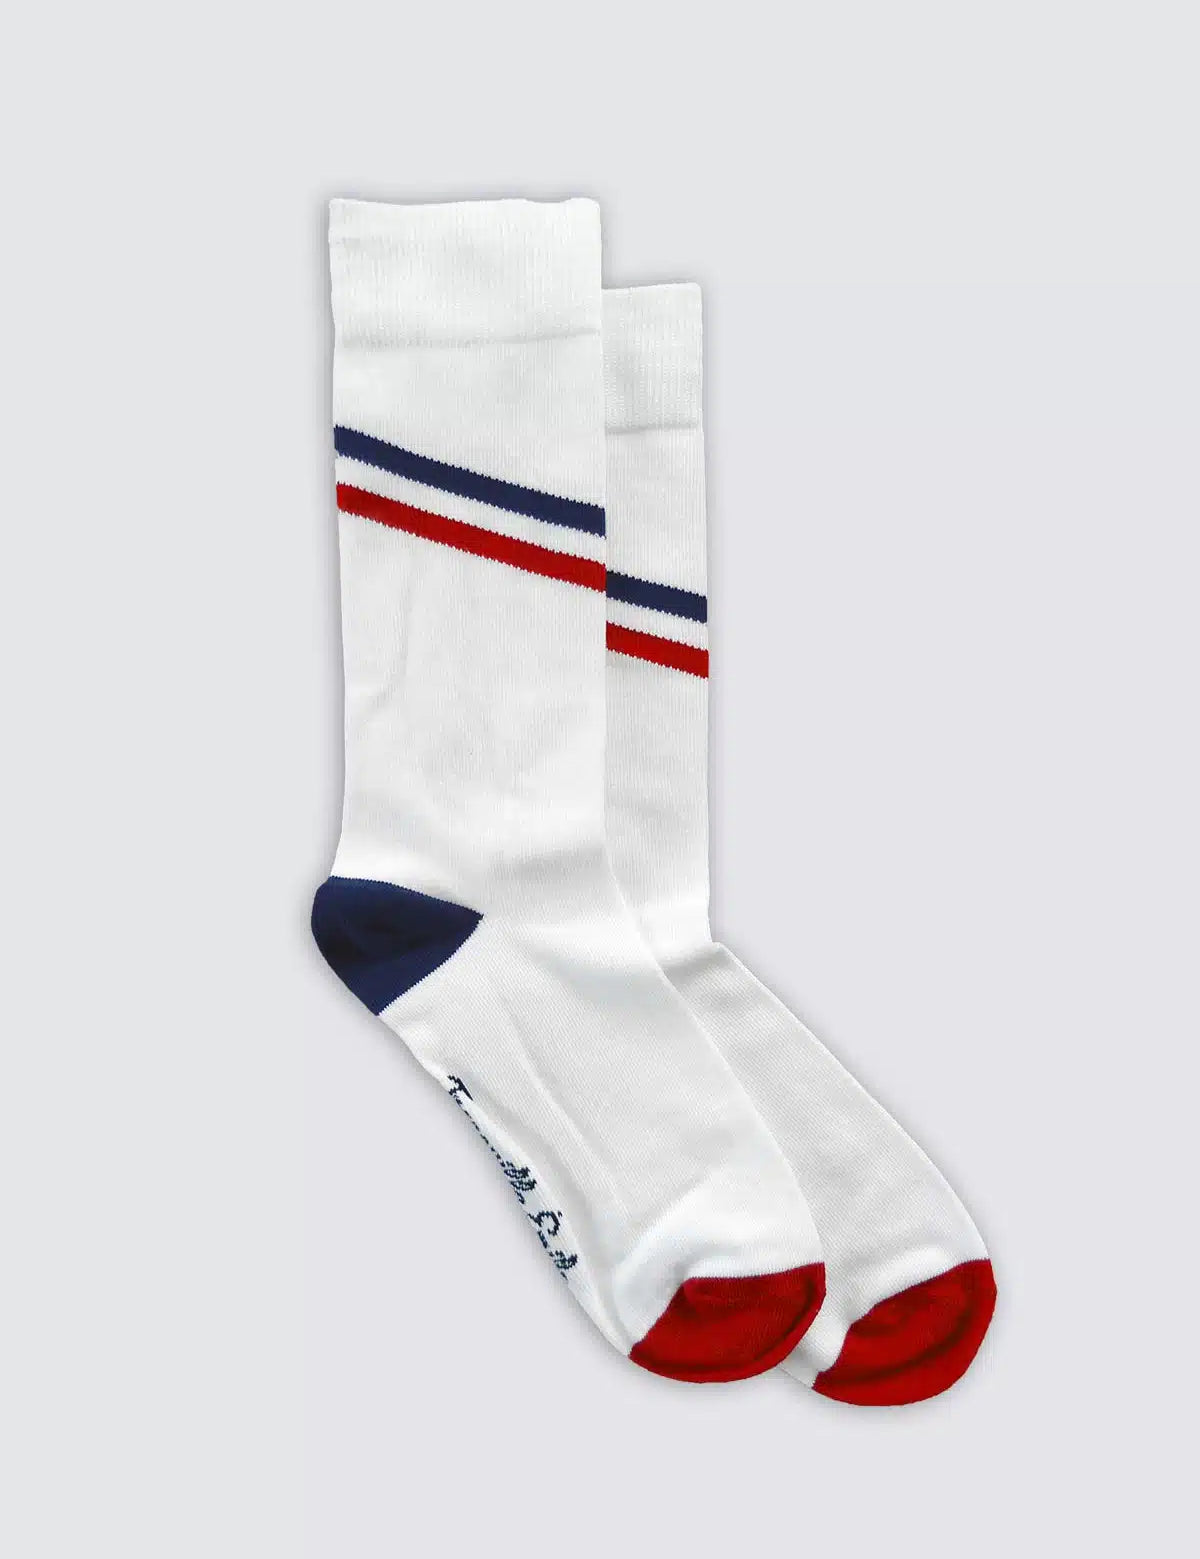 chaussettes-made-in-france-les-prestiges-blanches-2_jpg.webp